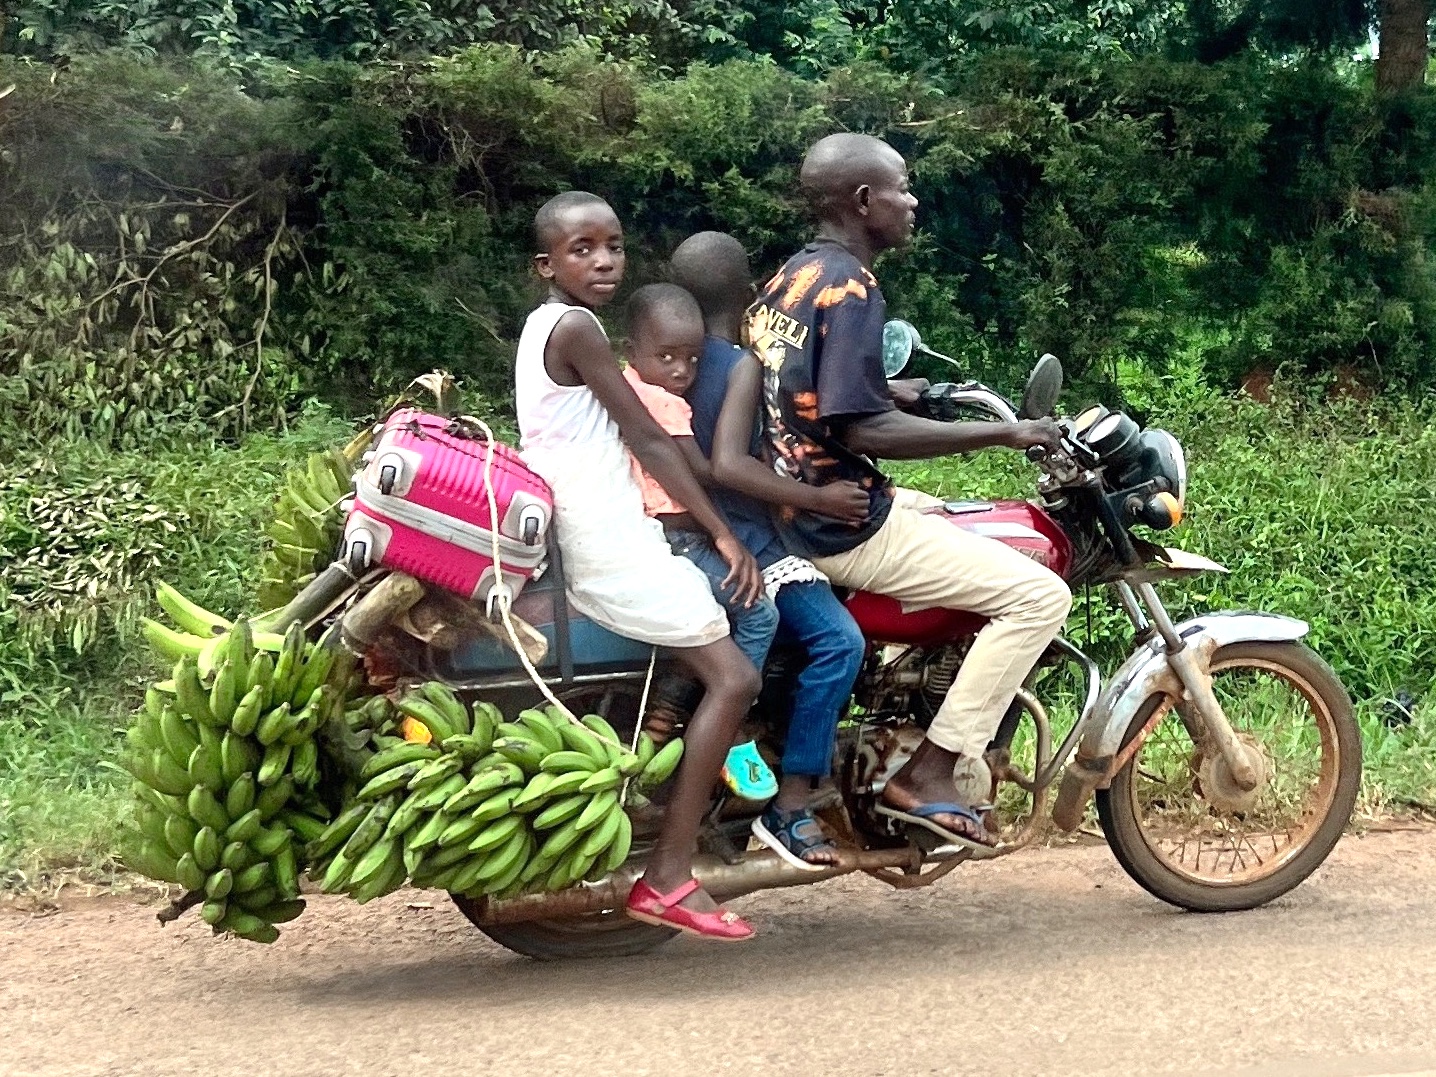 A motorcycle with dad and three children plus a pink suitcase and several stems of green bananas